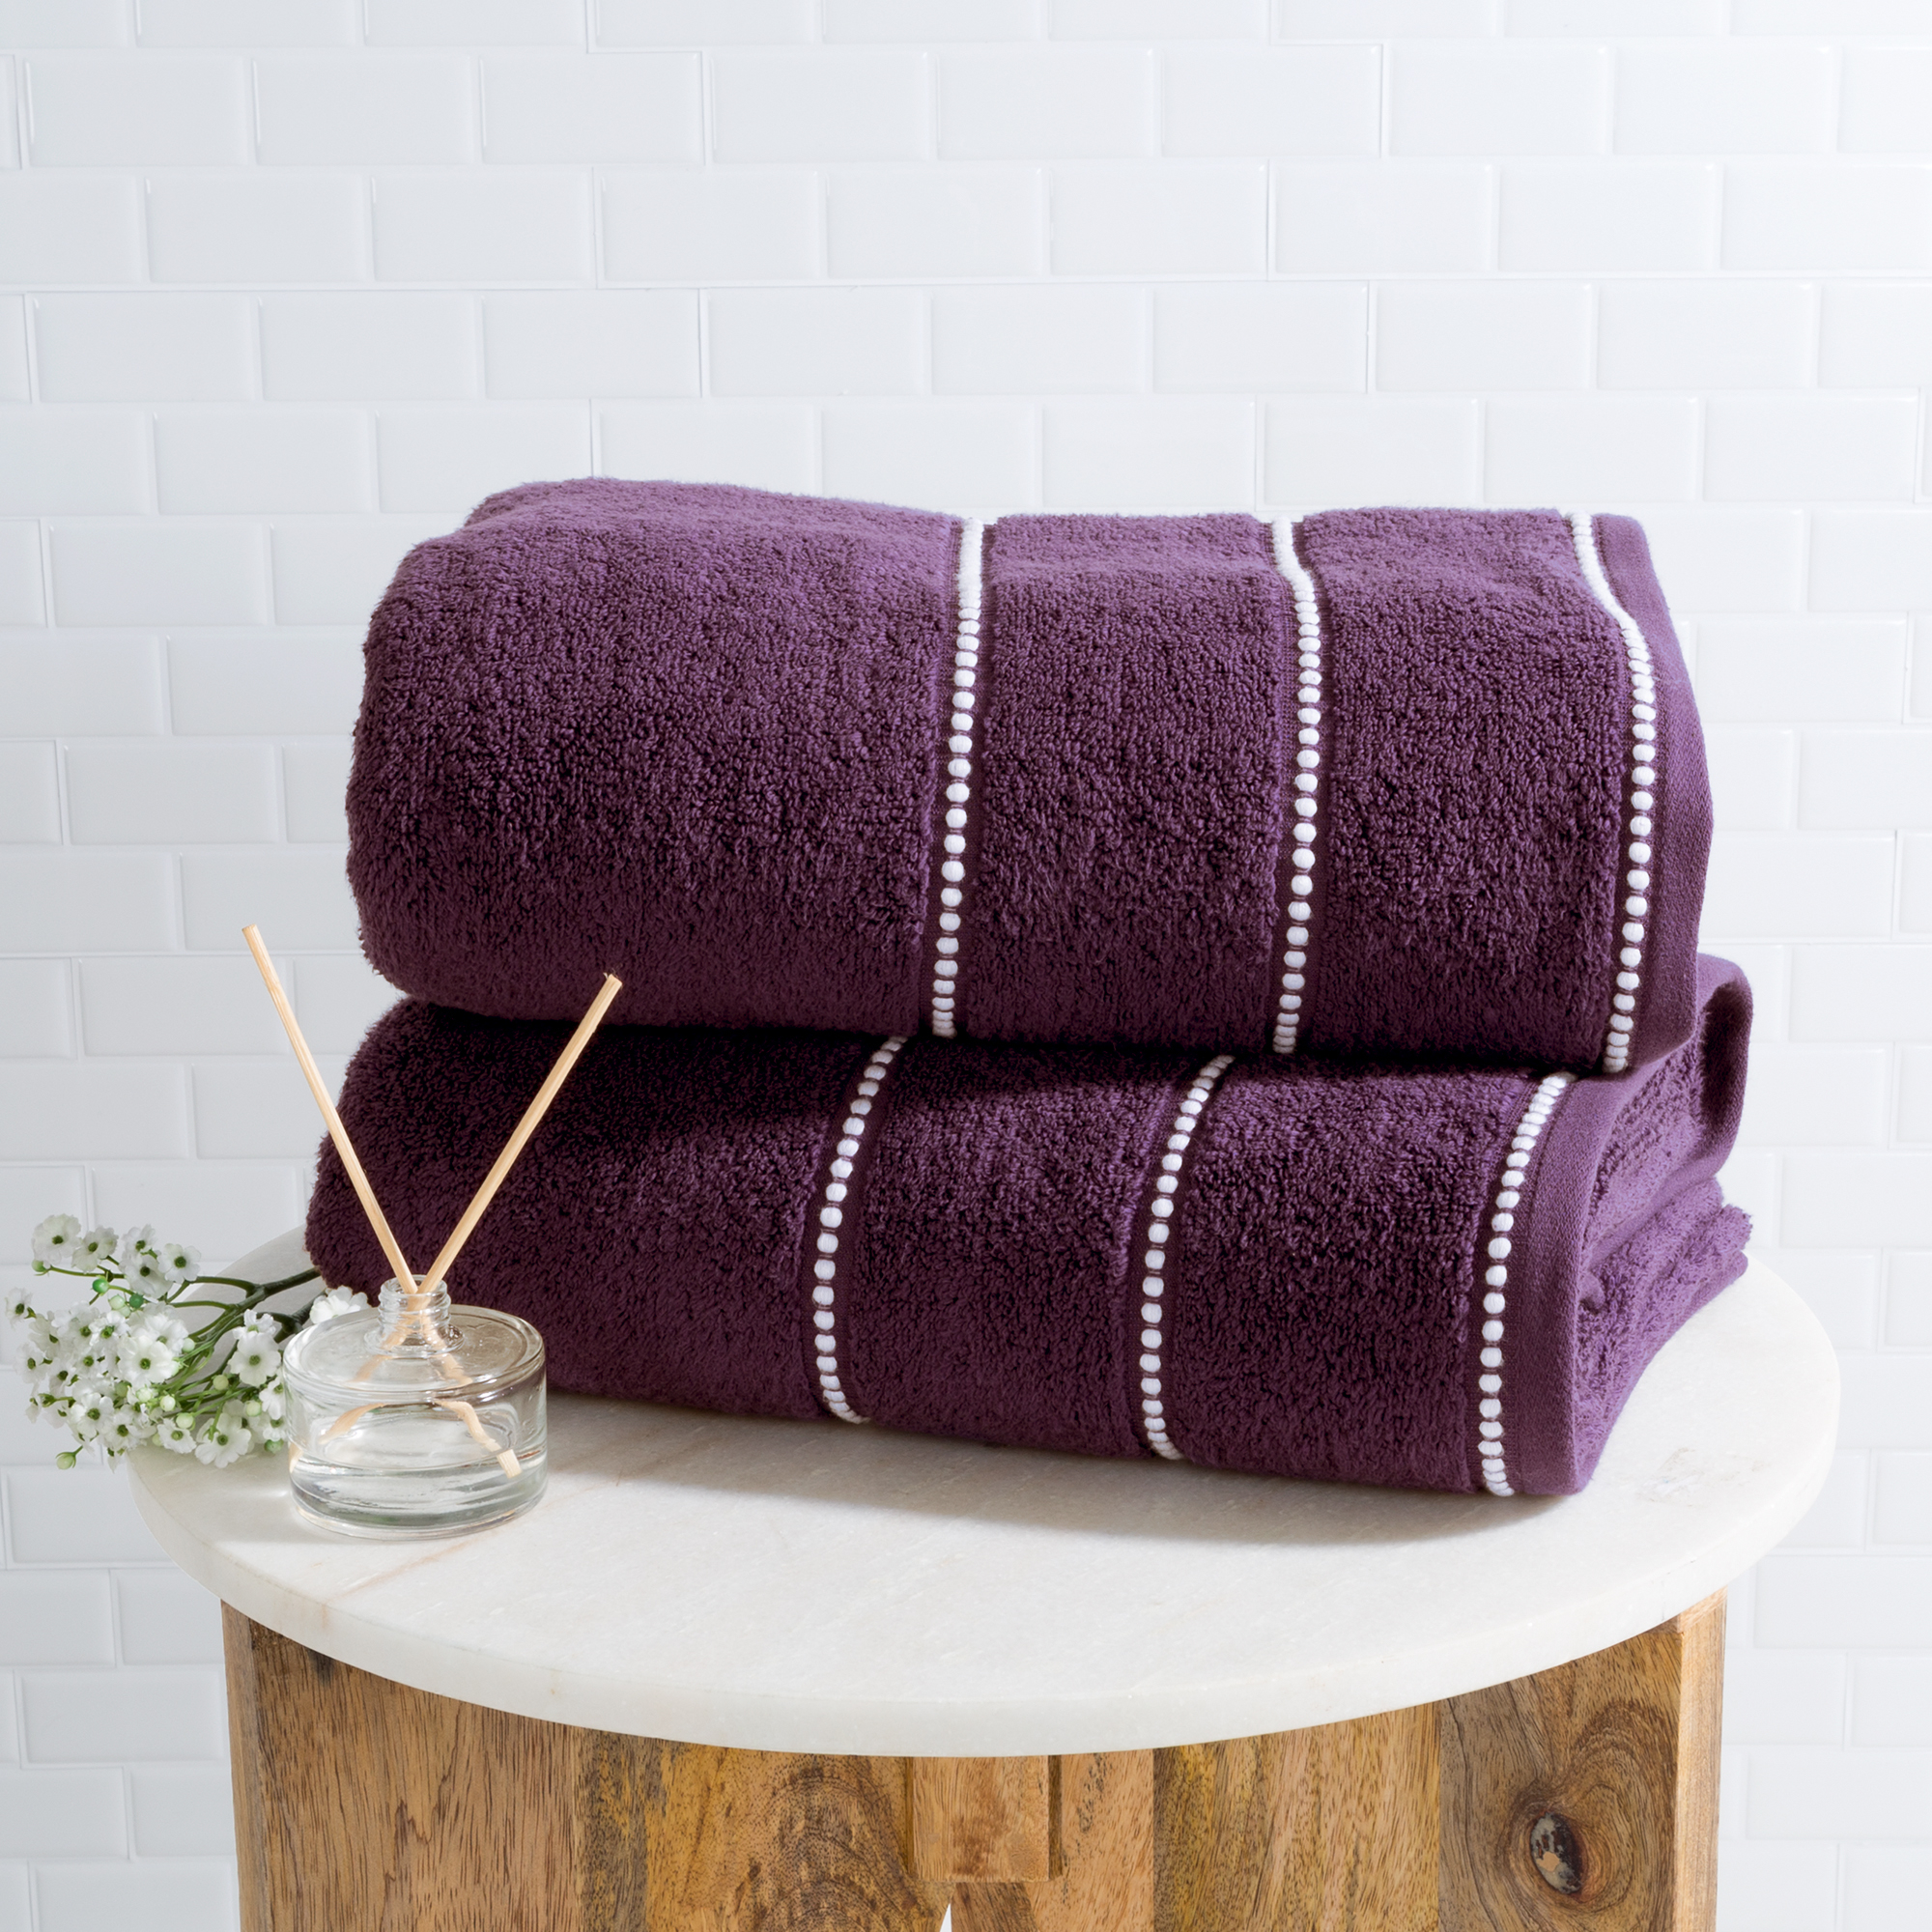 Luxurious Huge 34 X 68 In Cotton Towel Set- 2 Piece Bath Sheet Set Made From 100% Plush Cotton- Quick Dry, Soft And Absorbent Eggplant